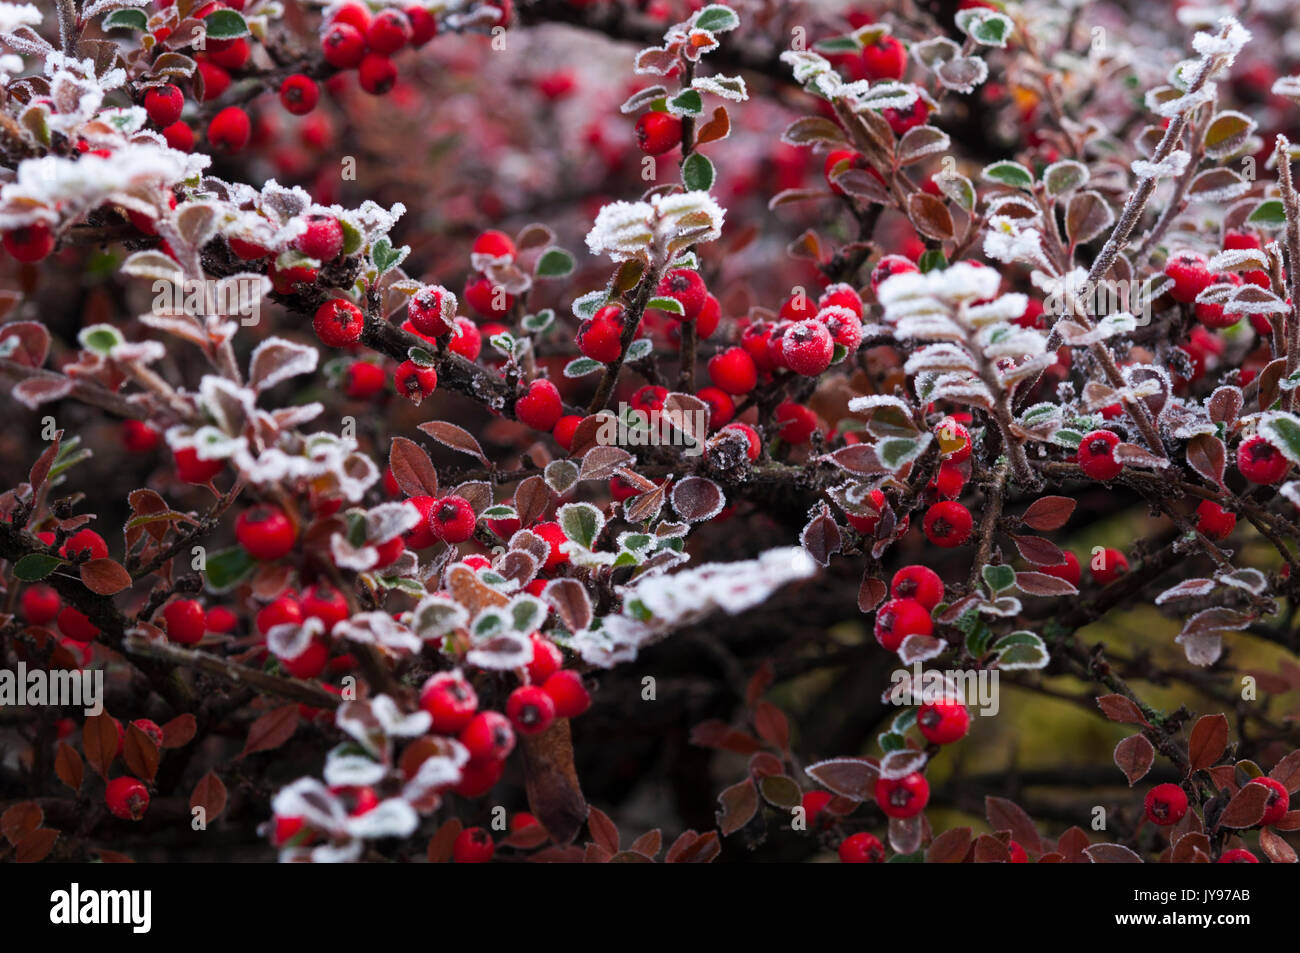 Bright red cotoneaster berries and delicate leaves coated in hoar frost on a cold December morning in an English suburban garden. Stock Photo